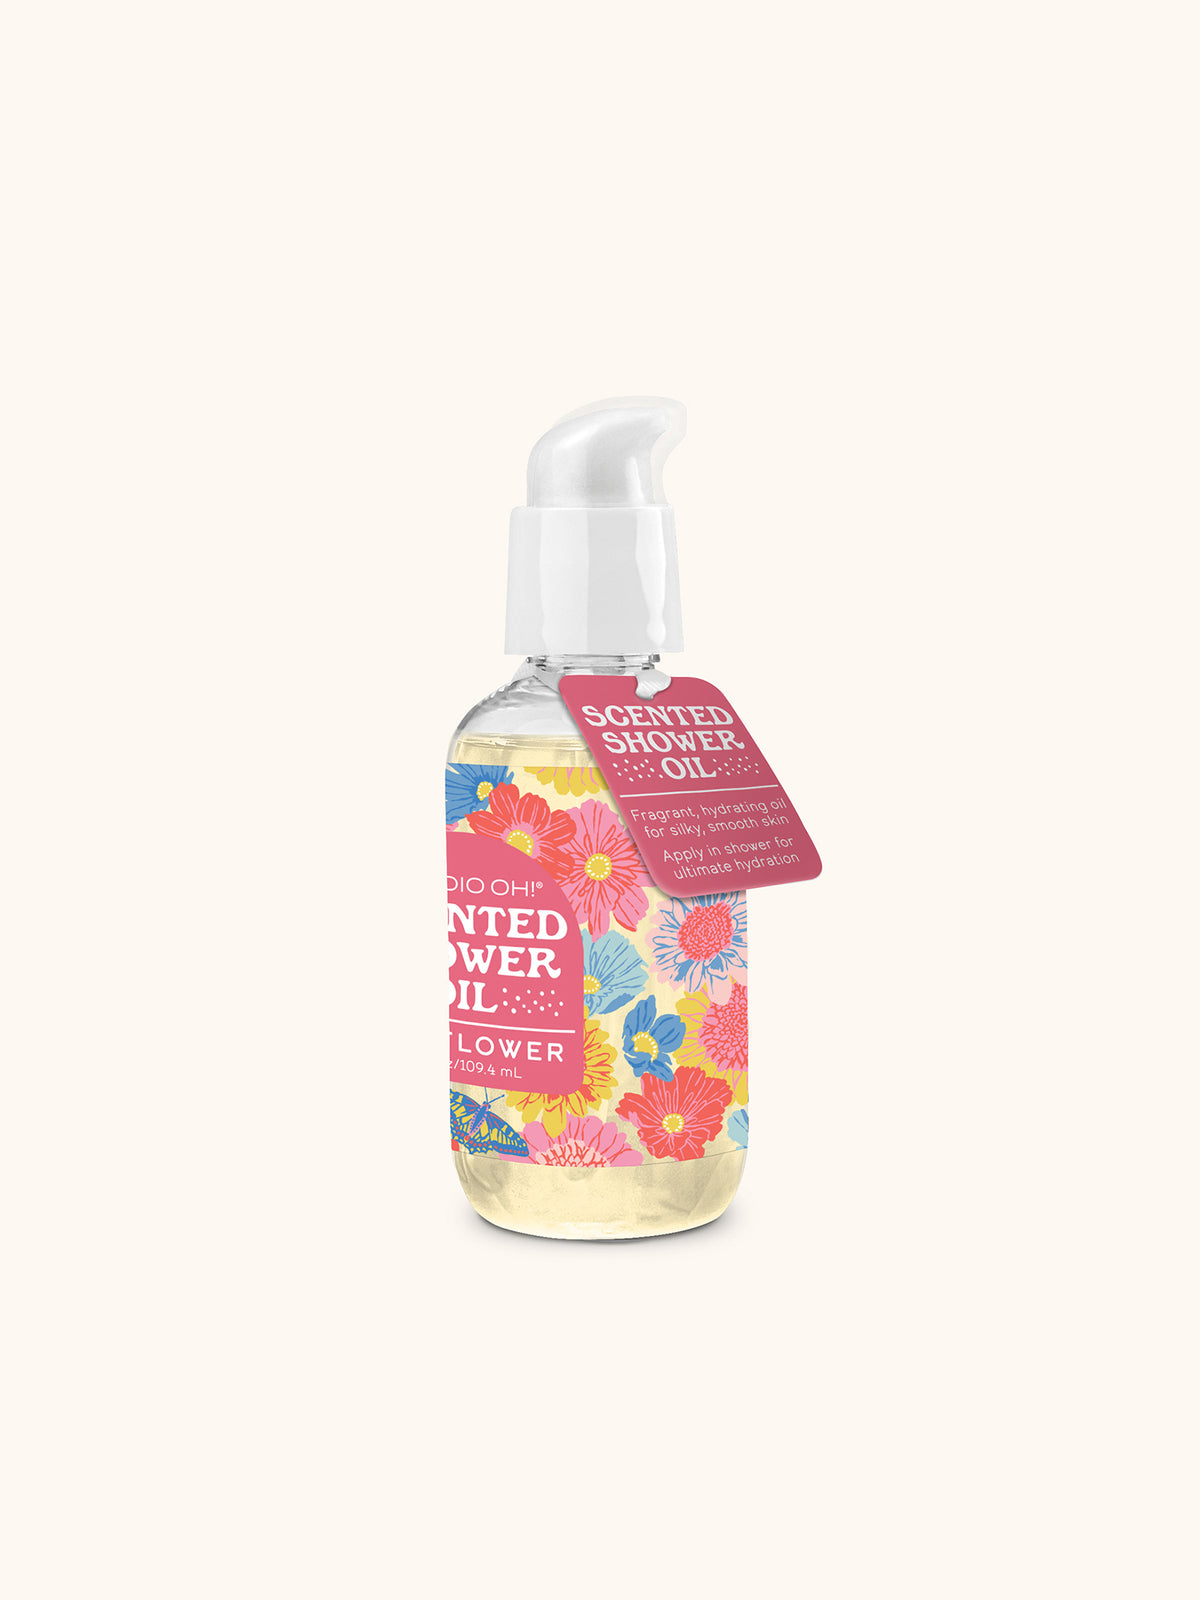 Butterfly Blossoms Scented Shower Oils